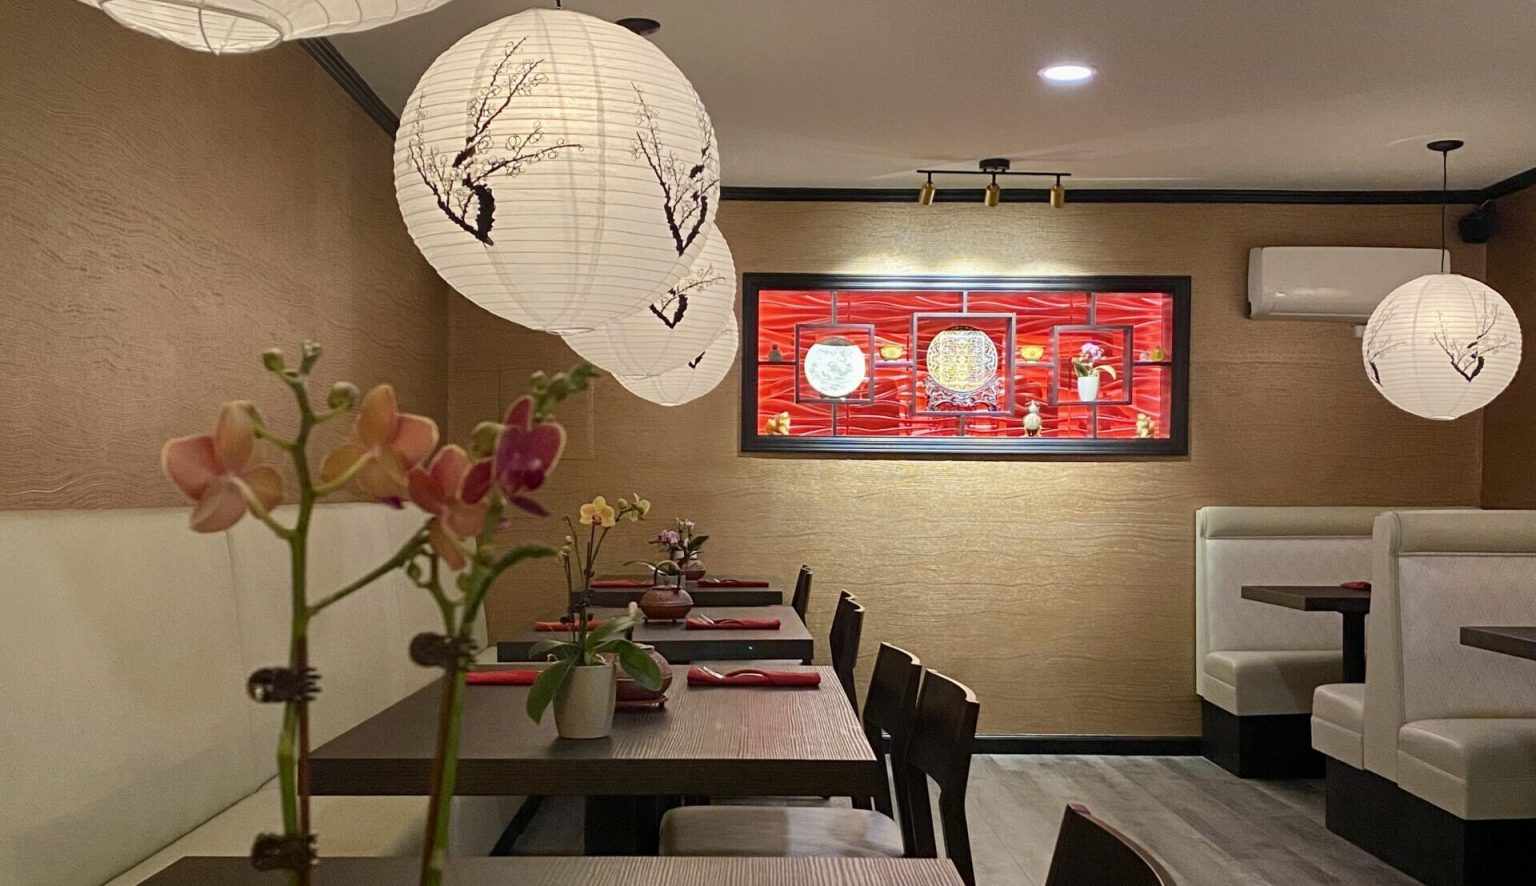 interior dining room with four black tables and traditional Chinese decor and design with red and black colors